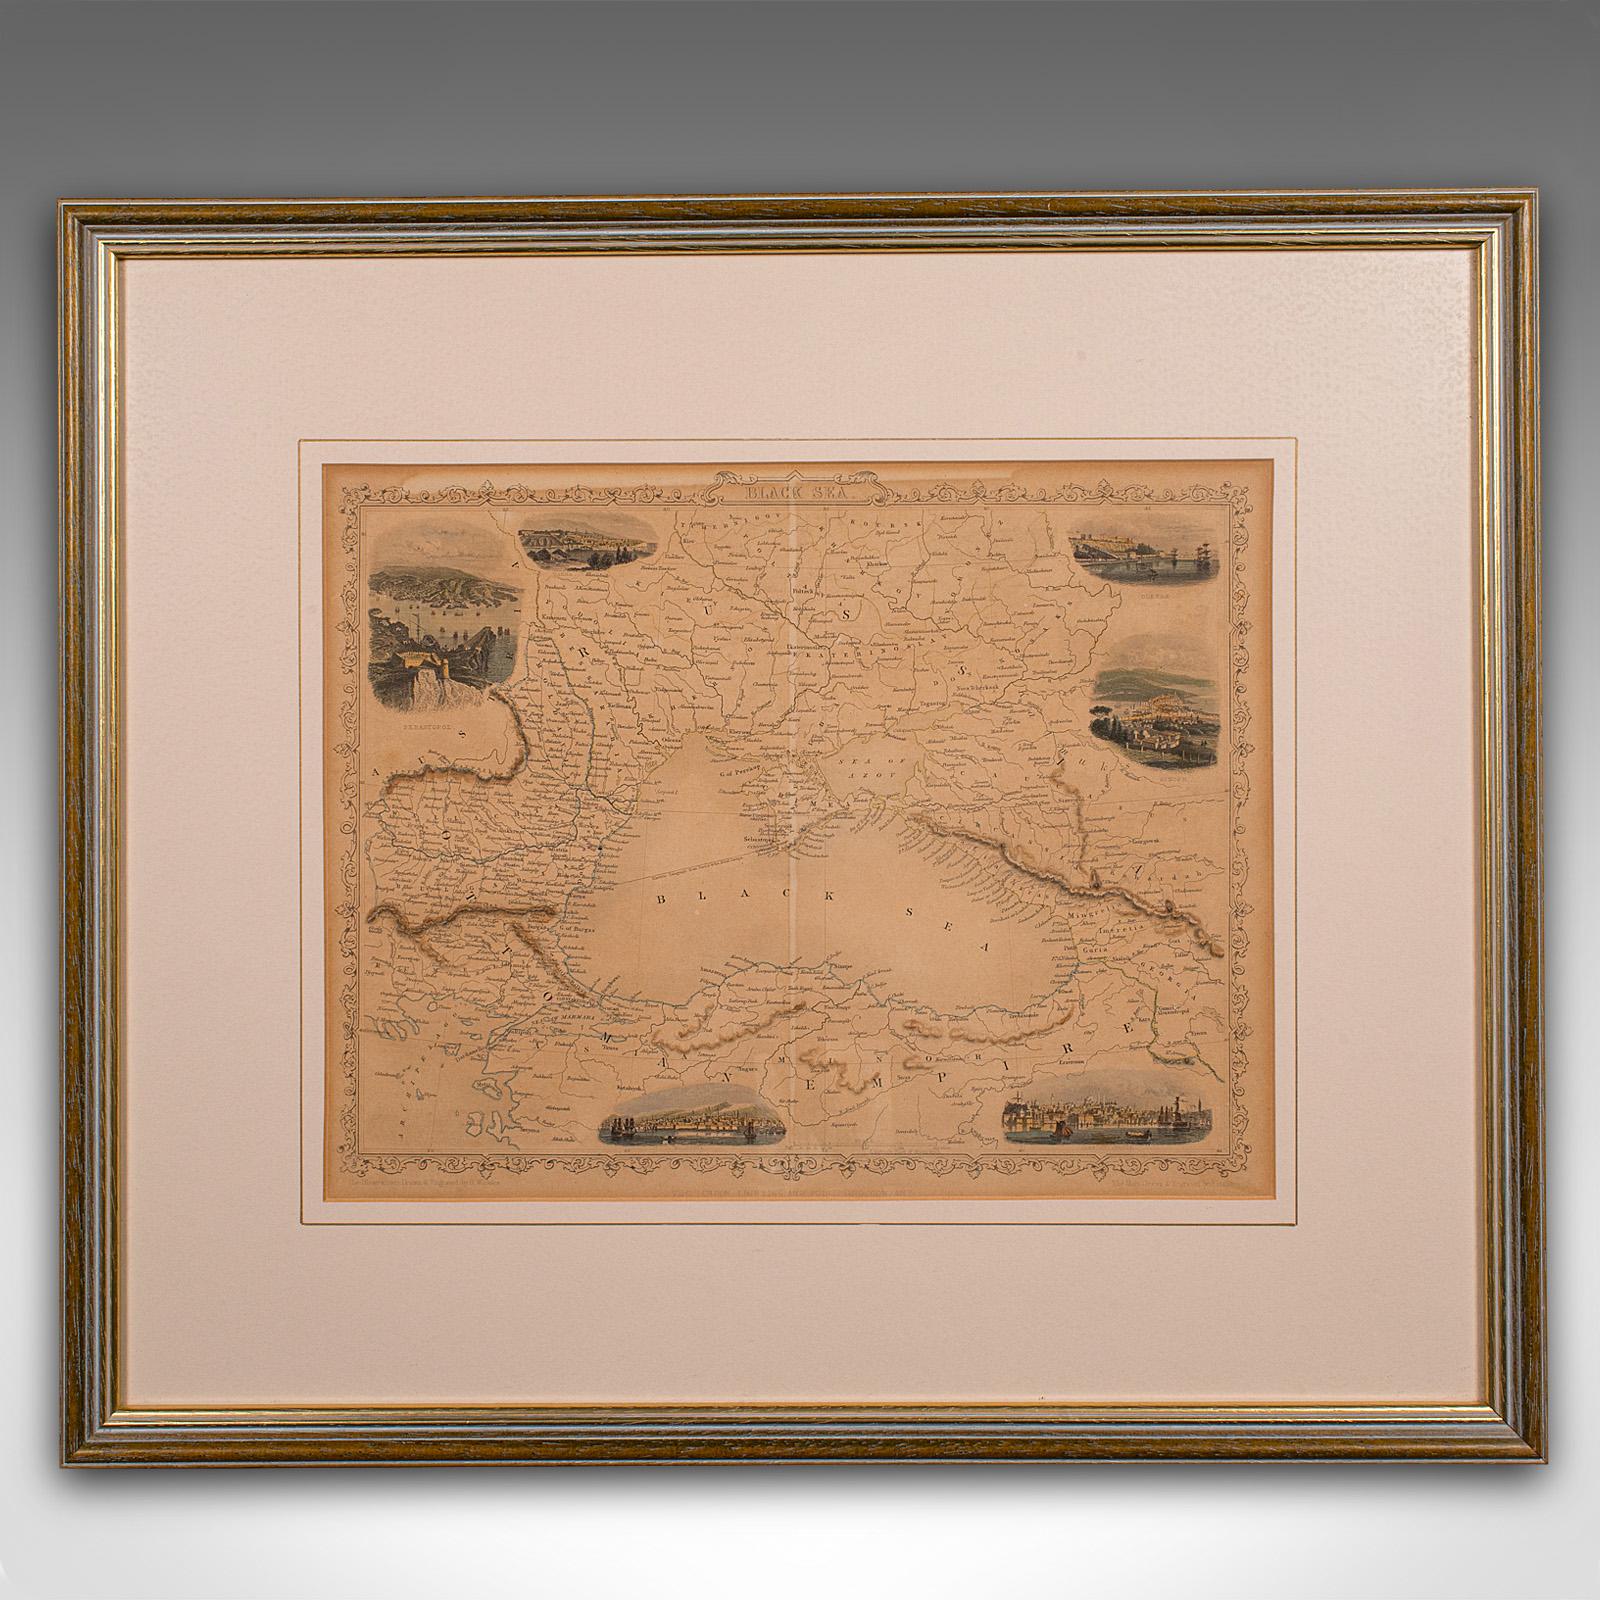 This is an antique lithography map of the Black Sea region. An English, framed atlas engraving of cartographic interest by John Rapkin, dating to the early Victorian period and later, circa 1850.

John Rapkin was considered as one of the best map